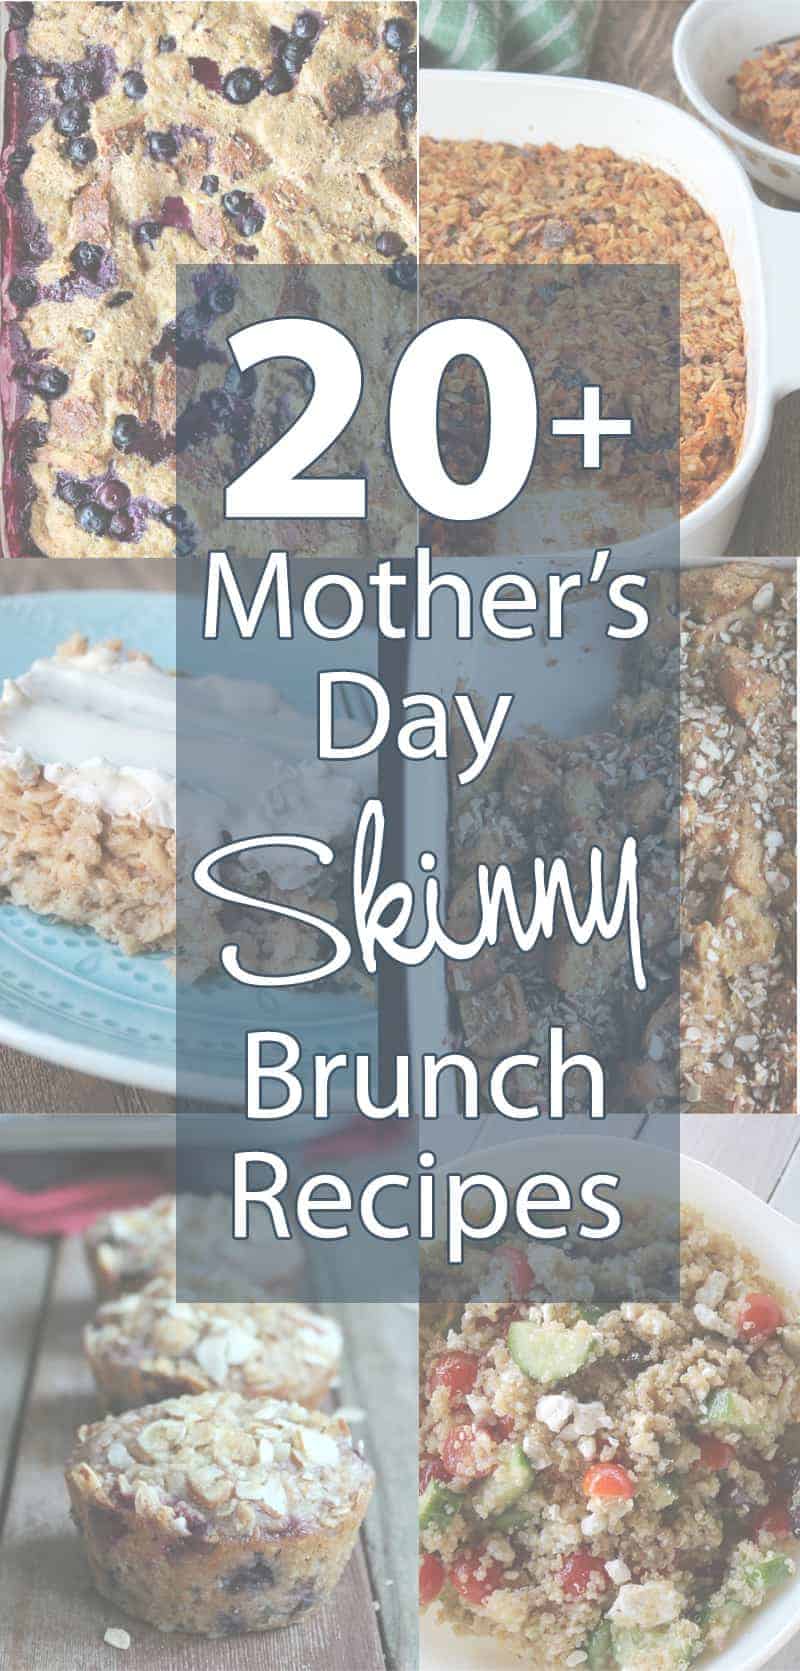 20 Mother's Day Skinny Brunch Recipes